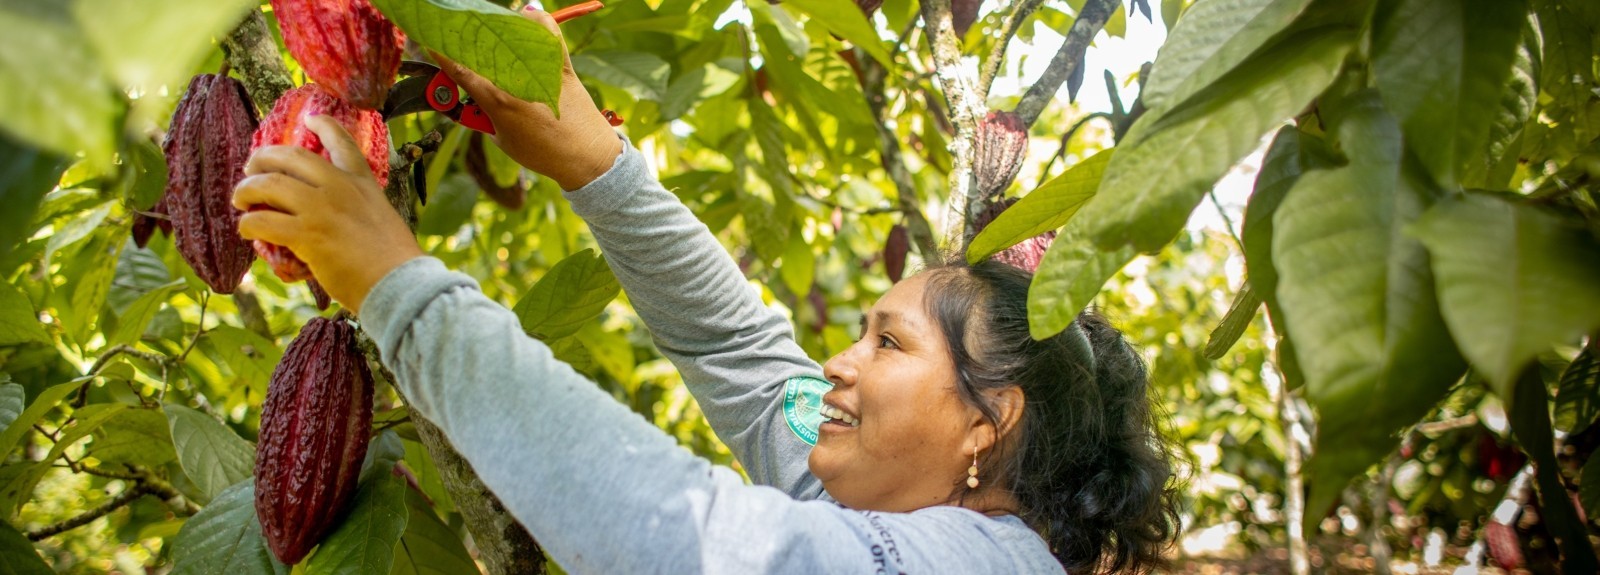 Lutheran World Relief builds capacity and promote women's empowerment in cocoa in Peru.